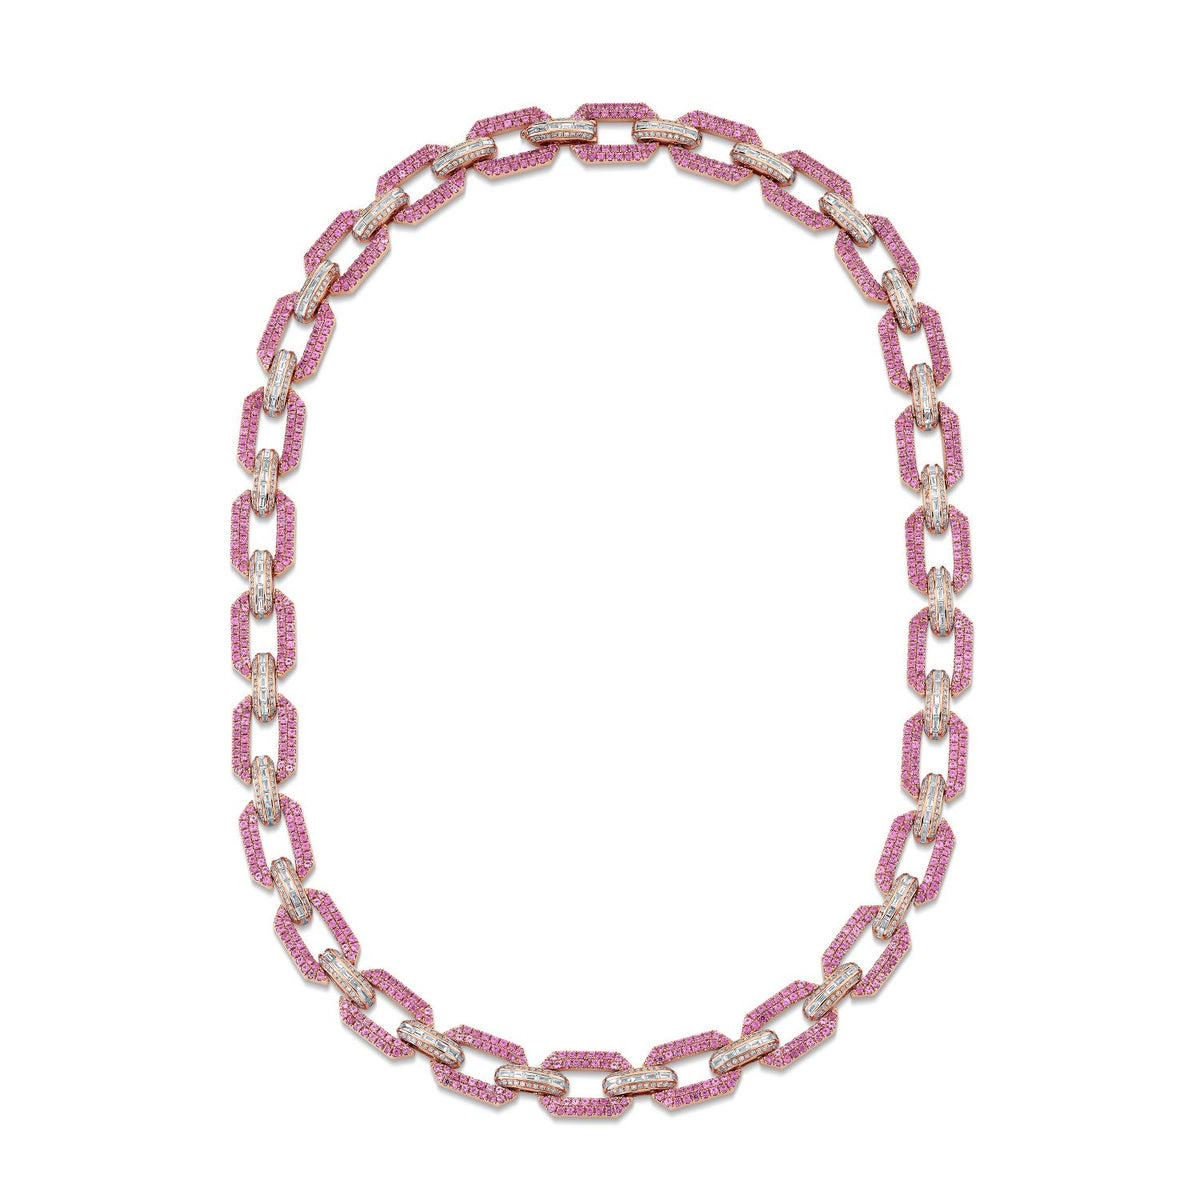 READY TO SHIP PINK SAPPHIRE & DIAMOND PAVE FLAT GEO LINK NECKLACE